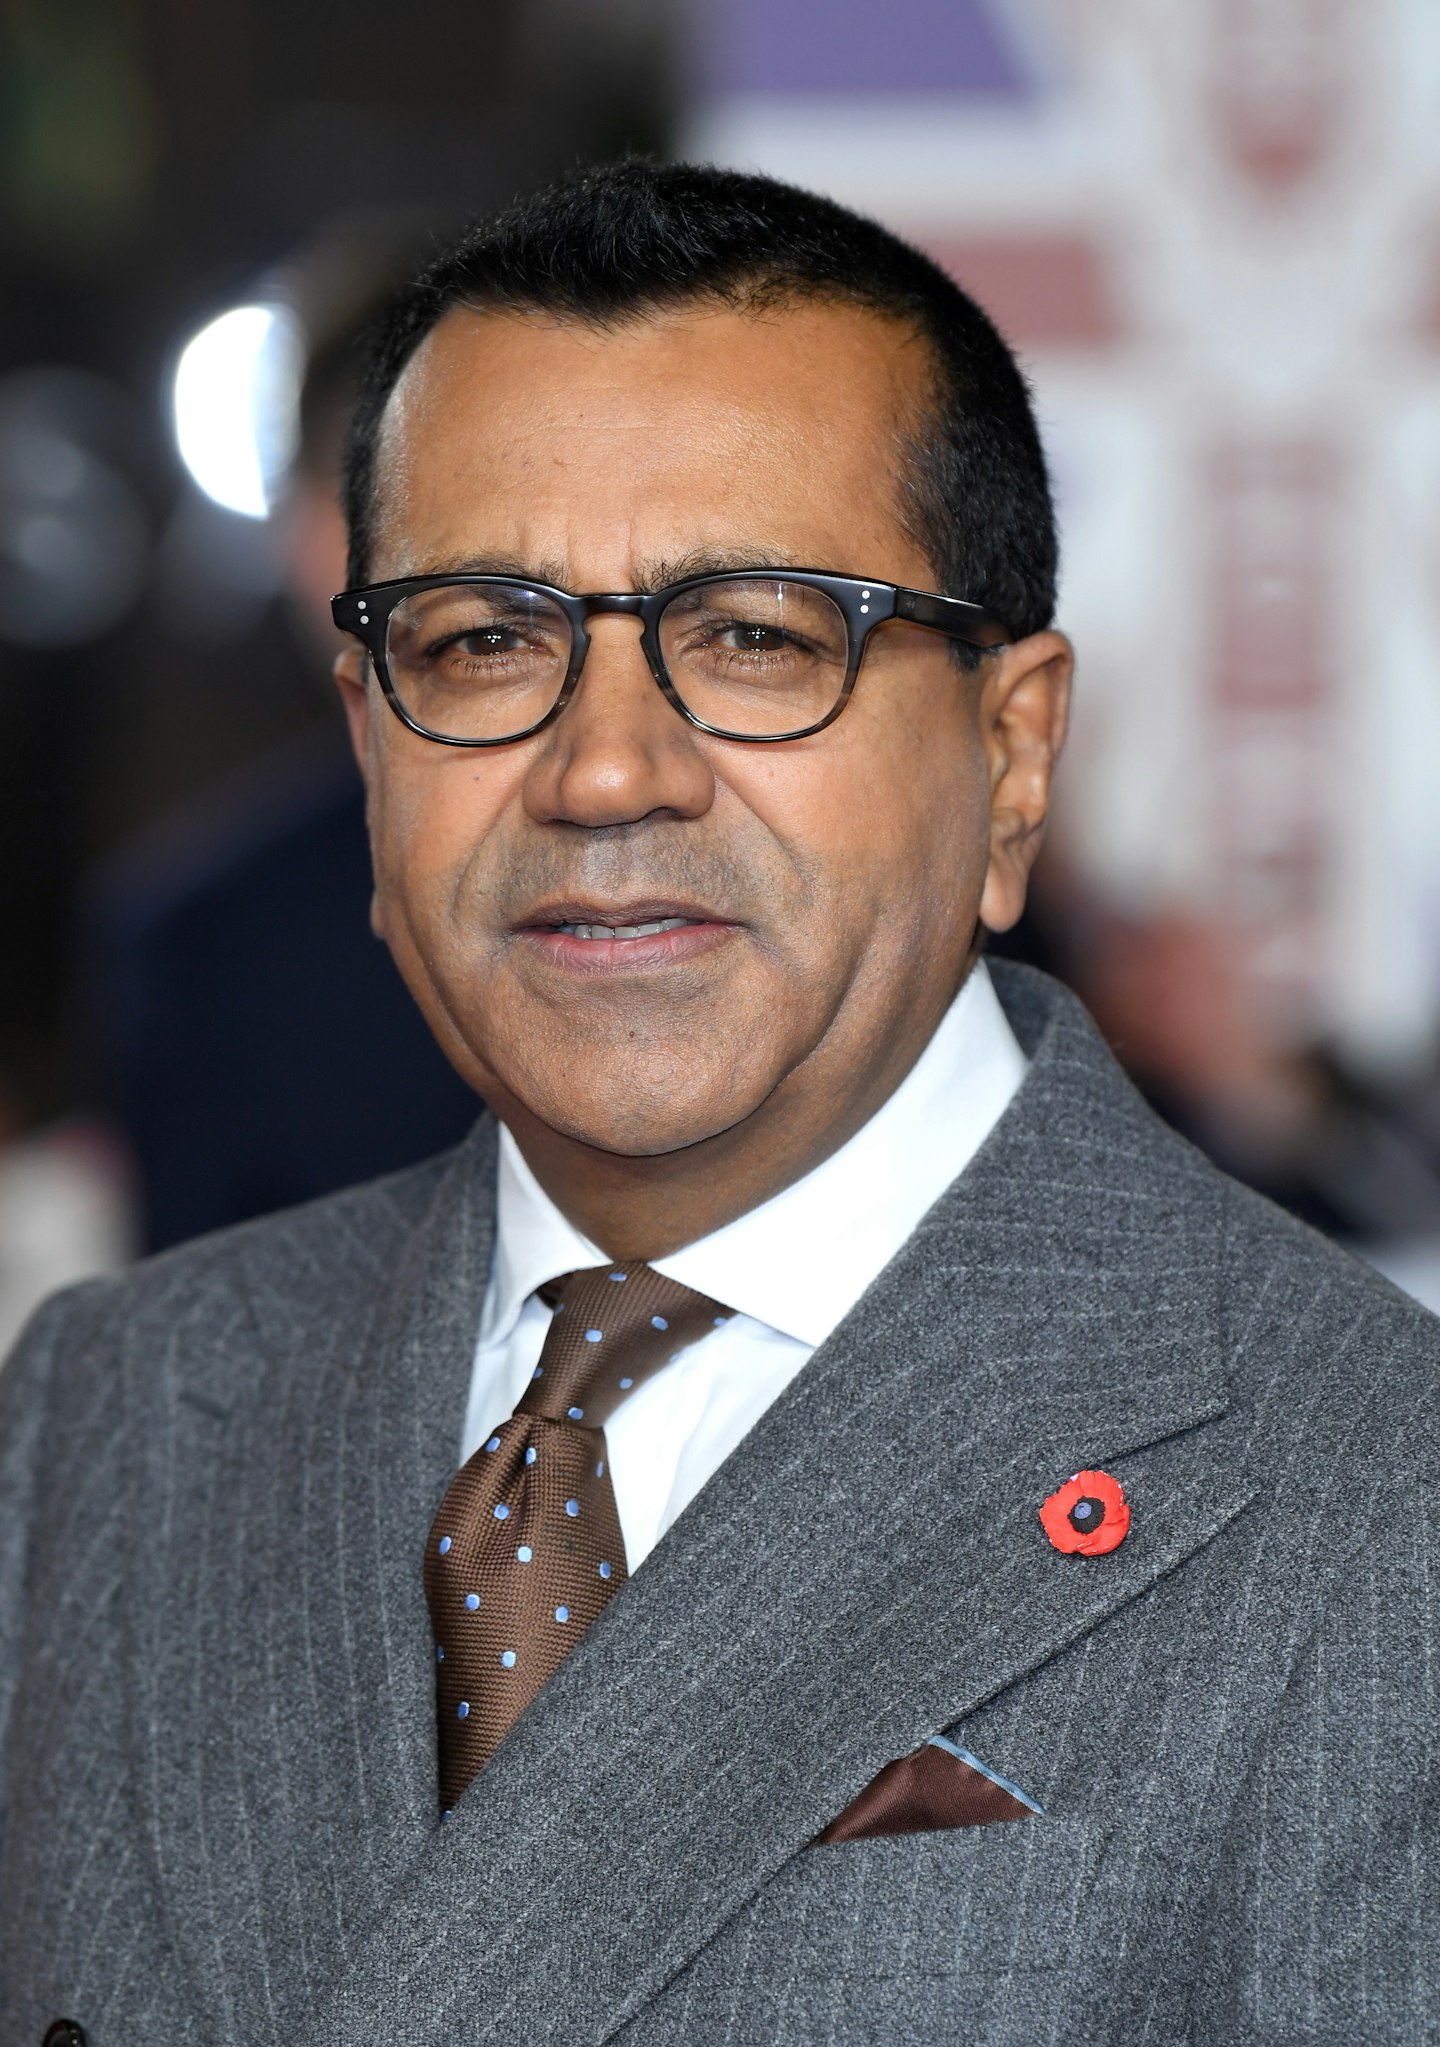 Martin Bashir, pictured in recent years